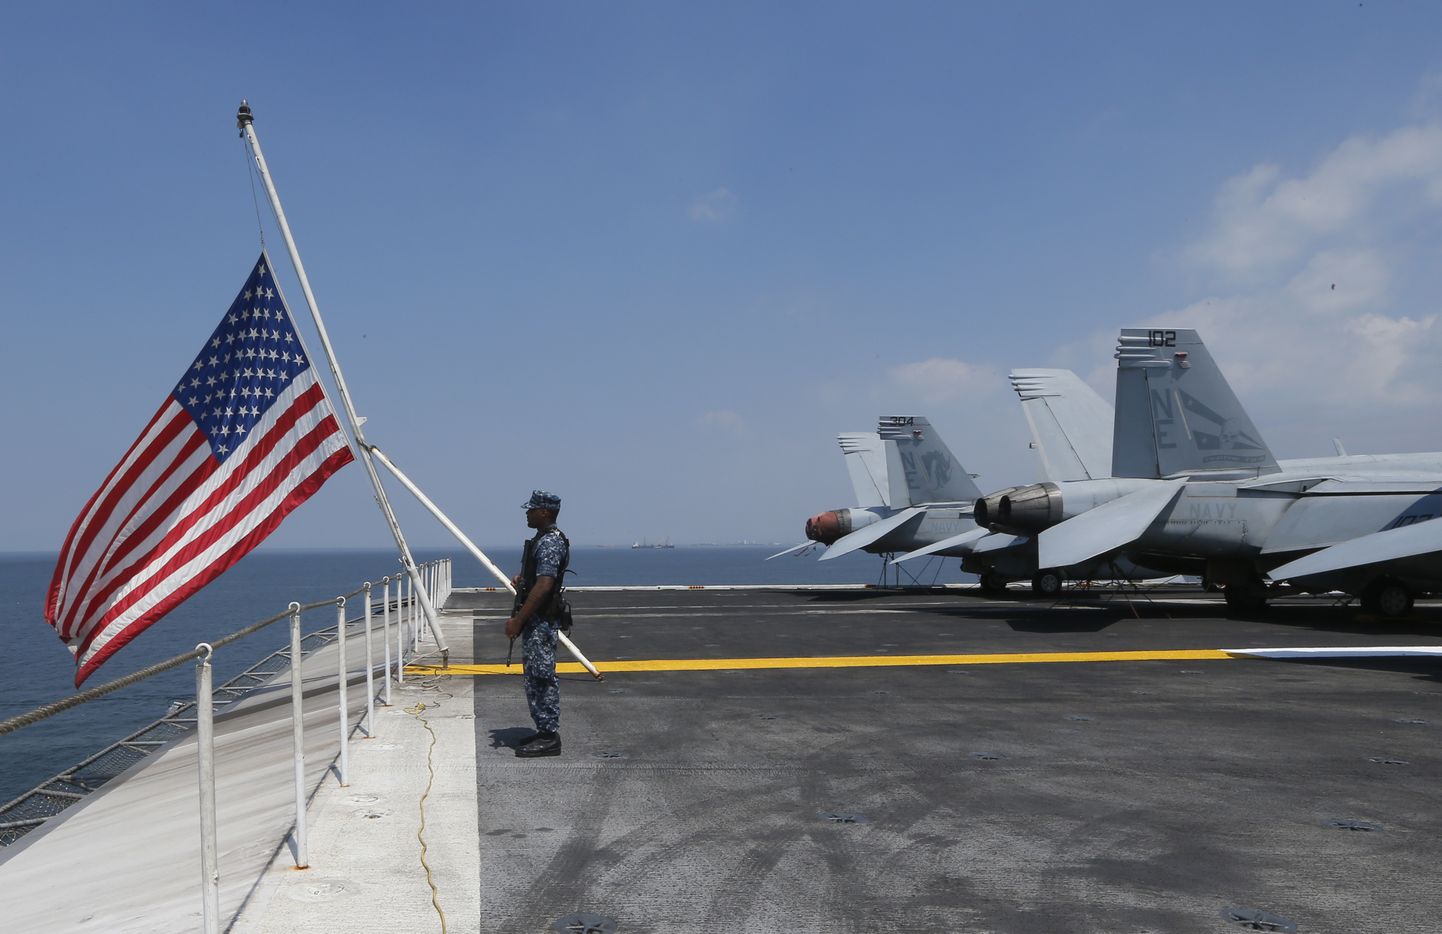 A U.S. Marine stands guard on the flight deck of the USS Carl Vinson aircraft carrier anchors off Manila, Philippines, for a five-day port call along with guided-missile destroyer USS Michael Murphy, Saturday, Feb. 17, 2018. Lt. Cmdr. Tim Hawkins told The Associated Press that American forces will continue to patrol the South China Sea wherever international law allows when asked if China's newly built islands could restrain them in the disputed waters. (AP Photo/Bullit Marquez)